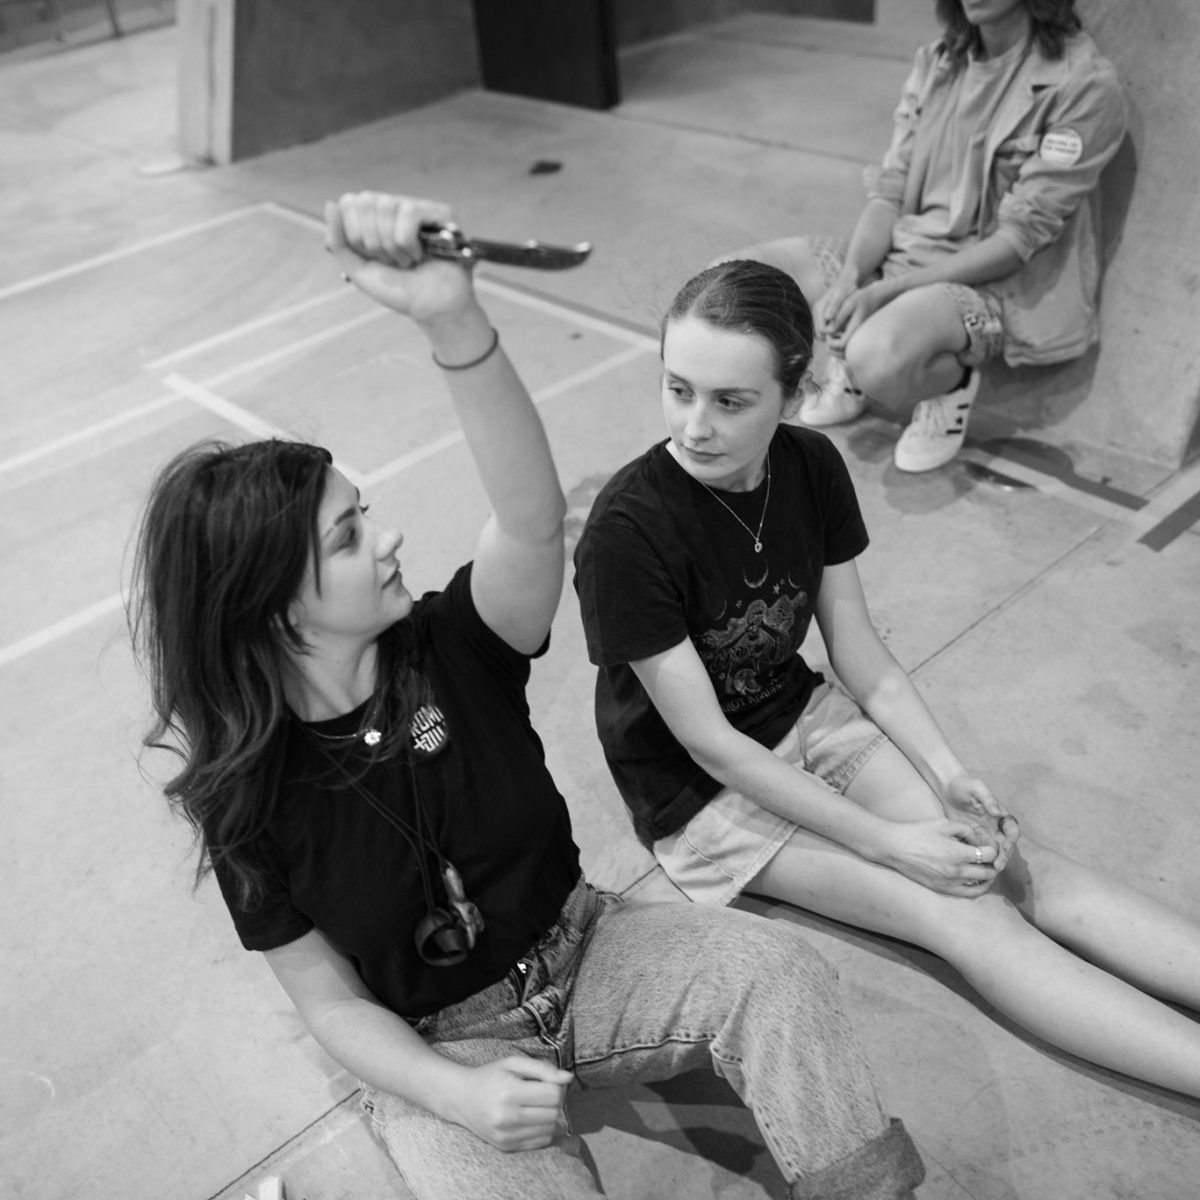 two young women on the floor acting